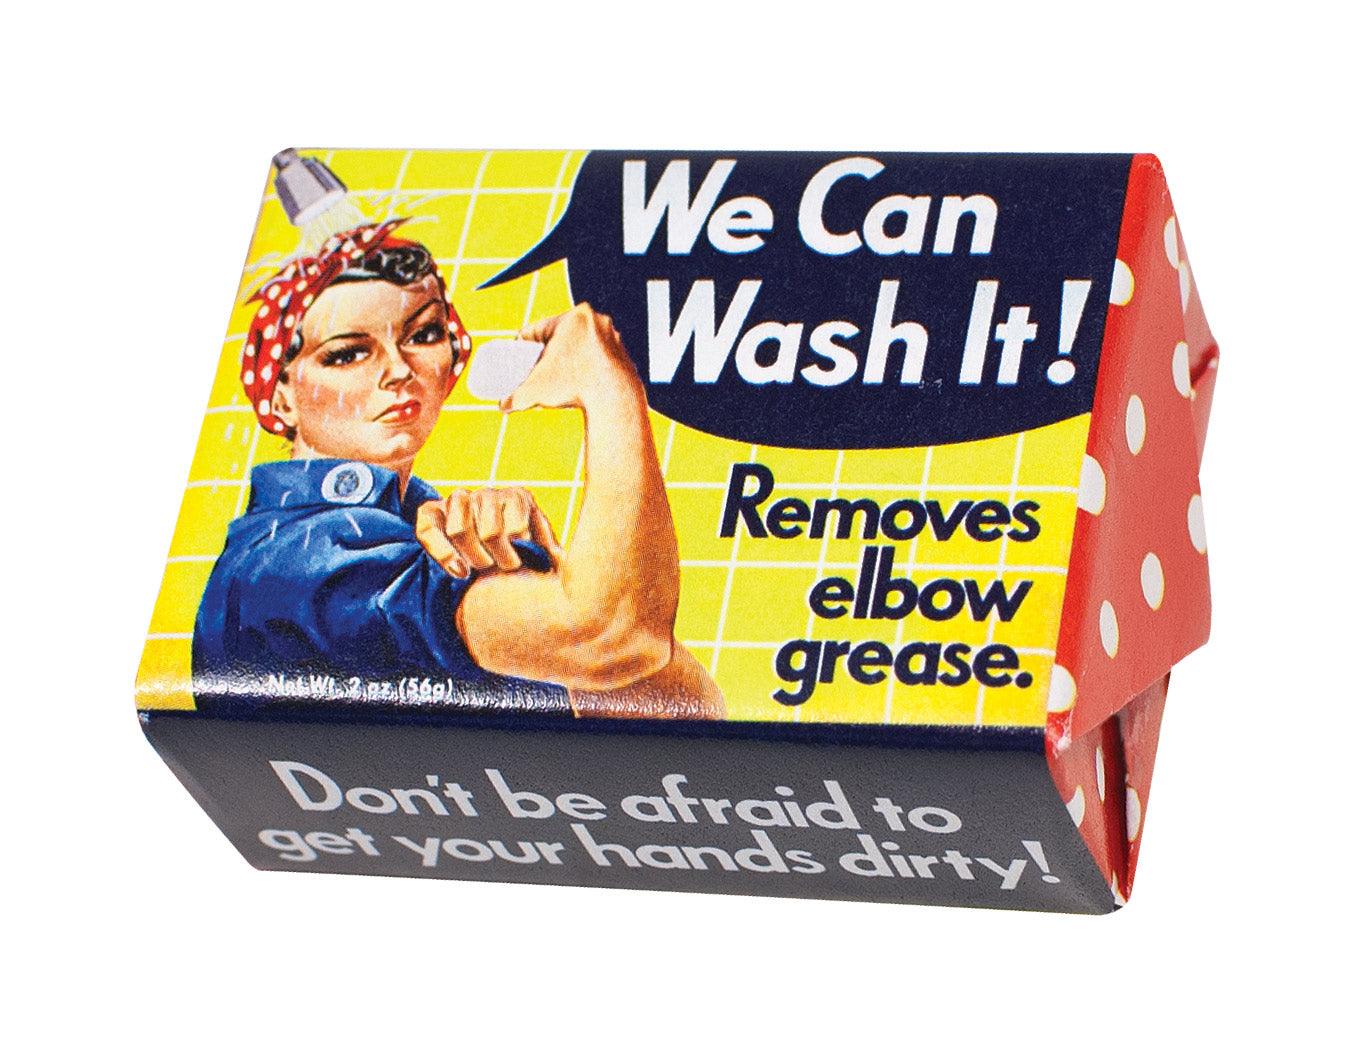 Product photo of Rosie the Riveter Soap, a novelty gift manufactured by The Unemployed Philosophers Guild.